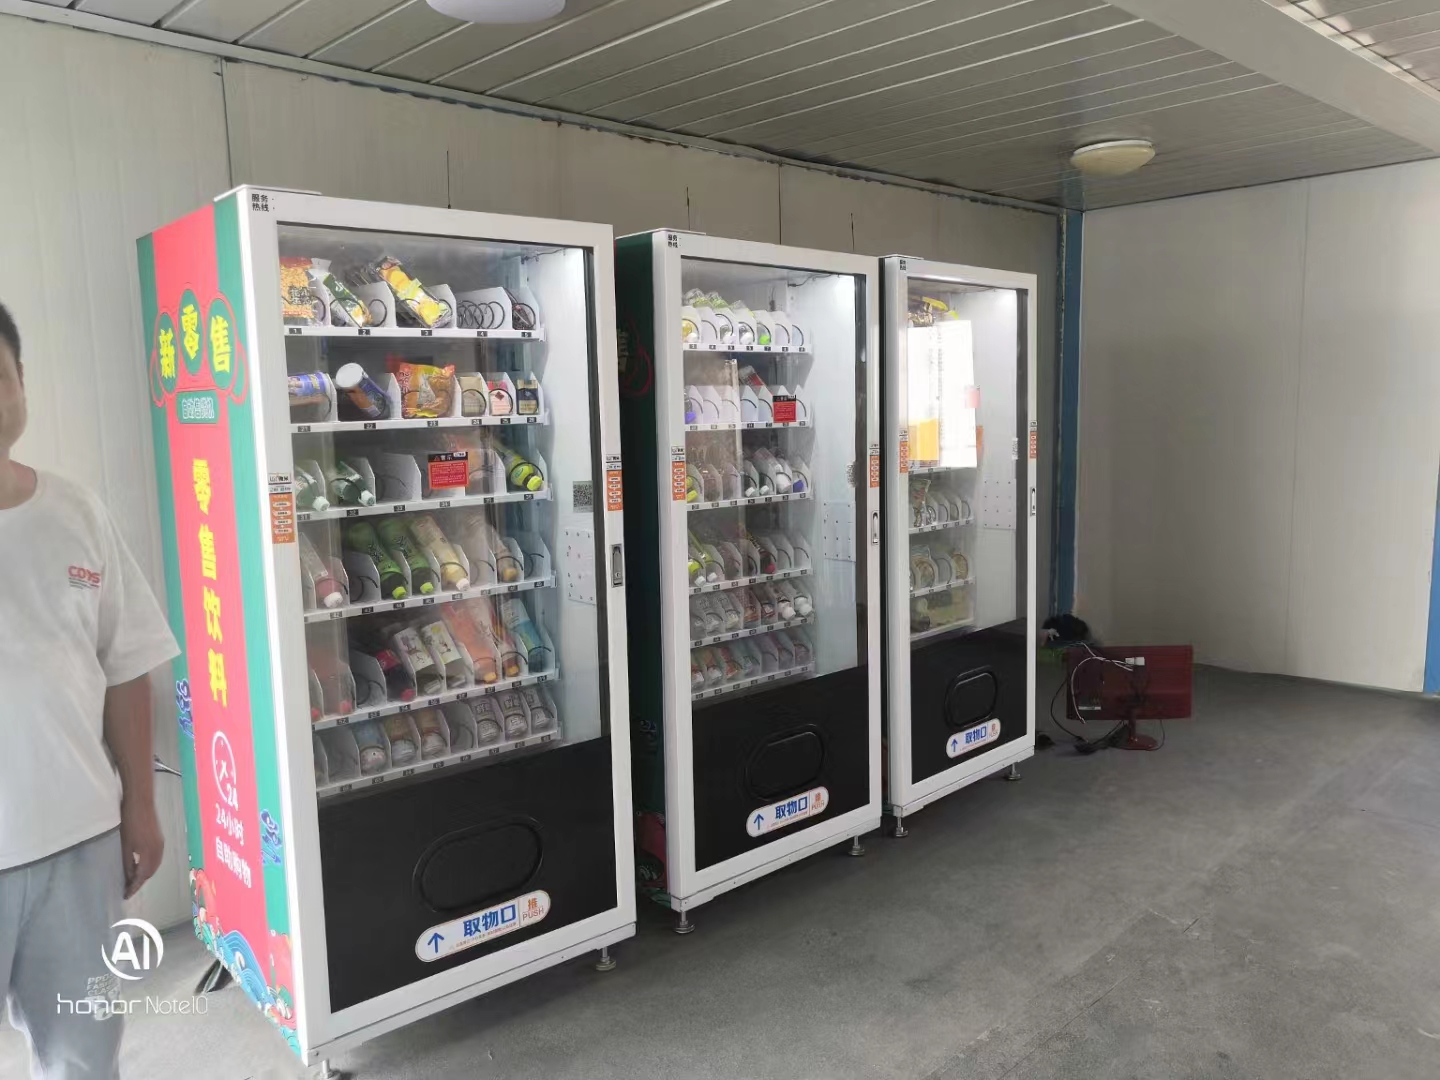 Will Africa be able to keep in line with the world for vending machine